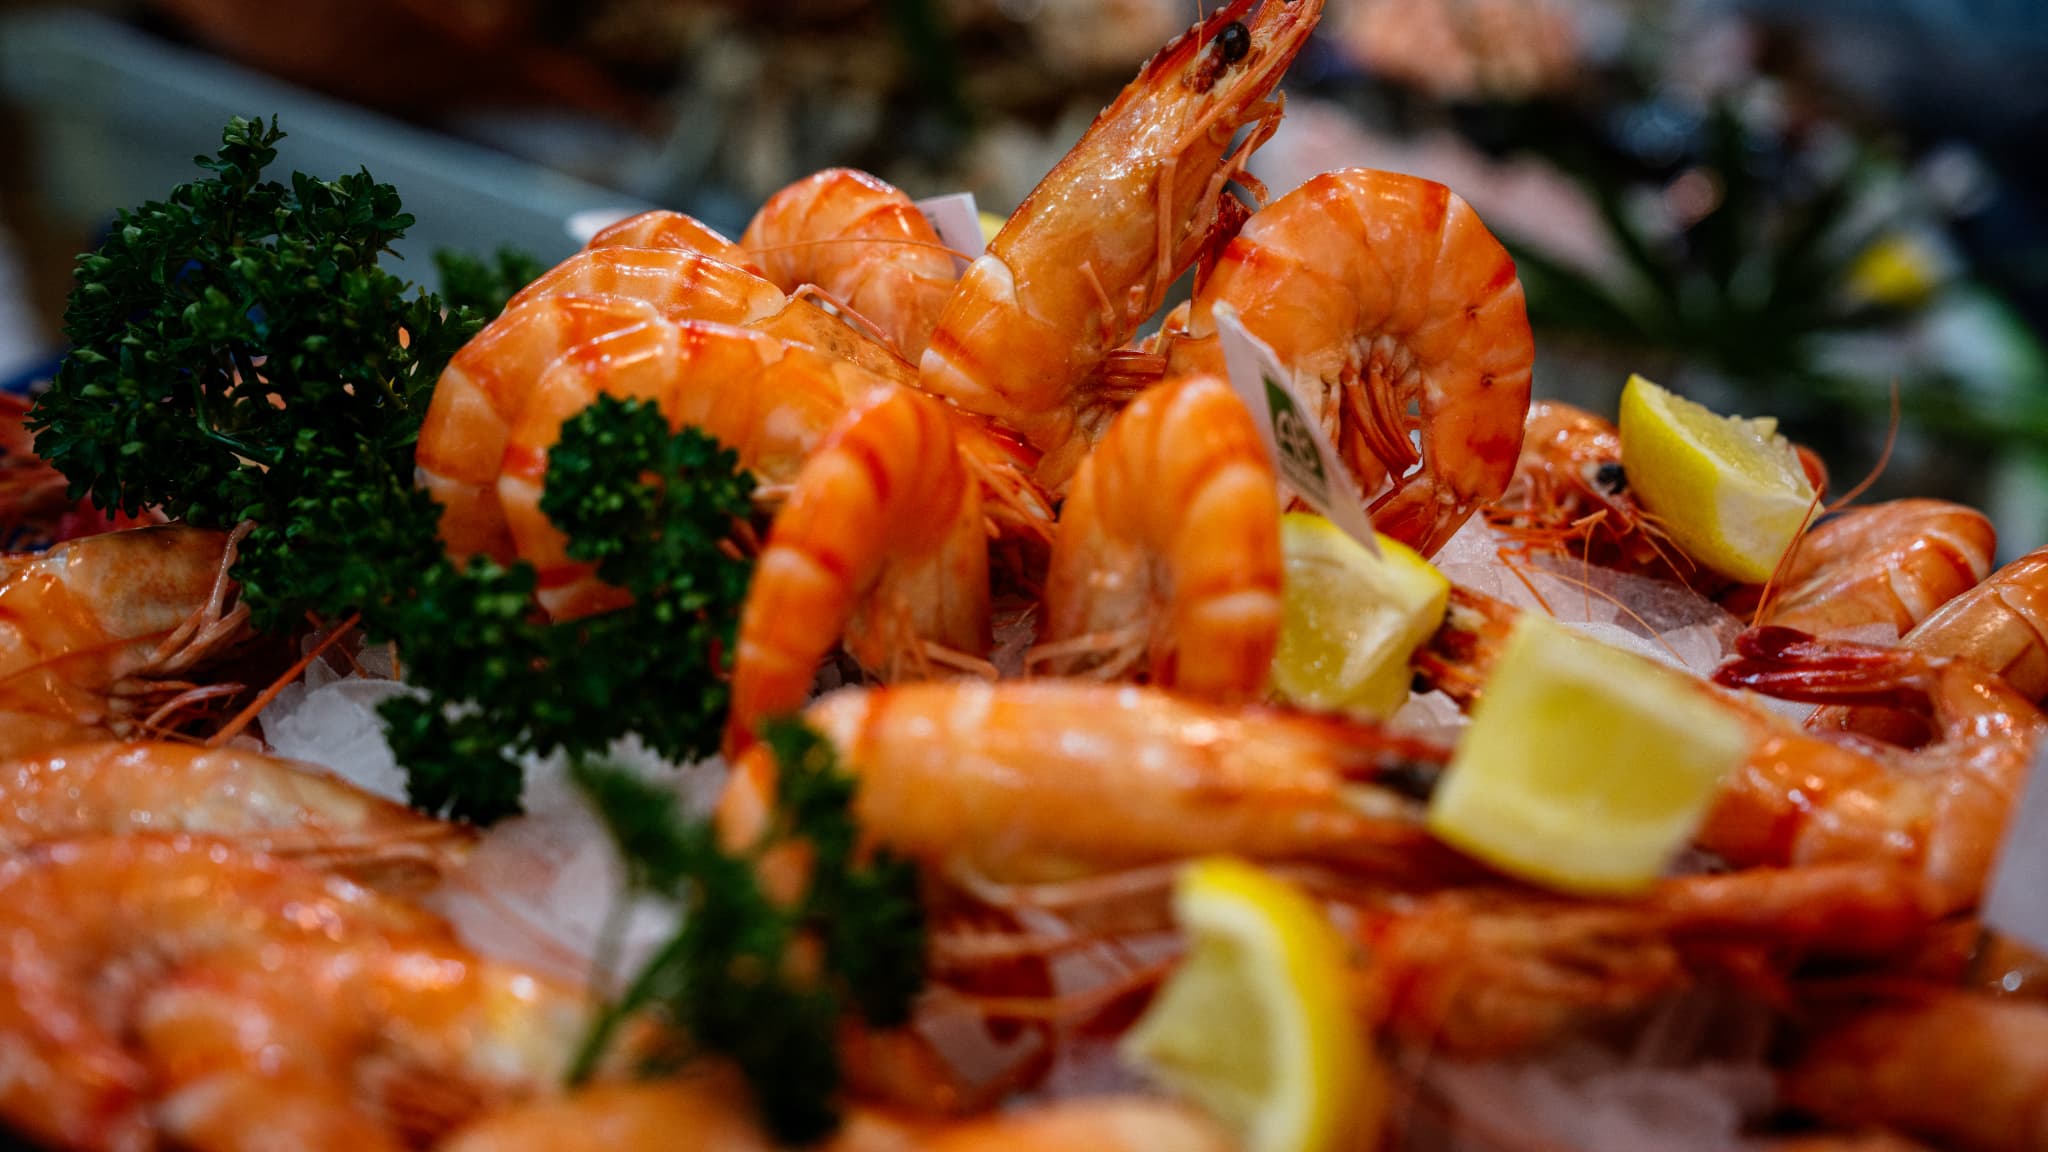 Shrimps, lobsters... The study draws attention to the concentration of eternal pollutants in seafood